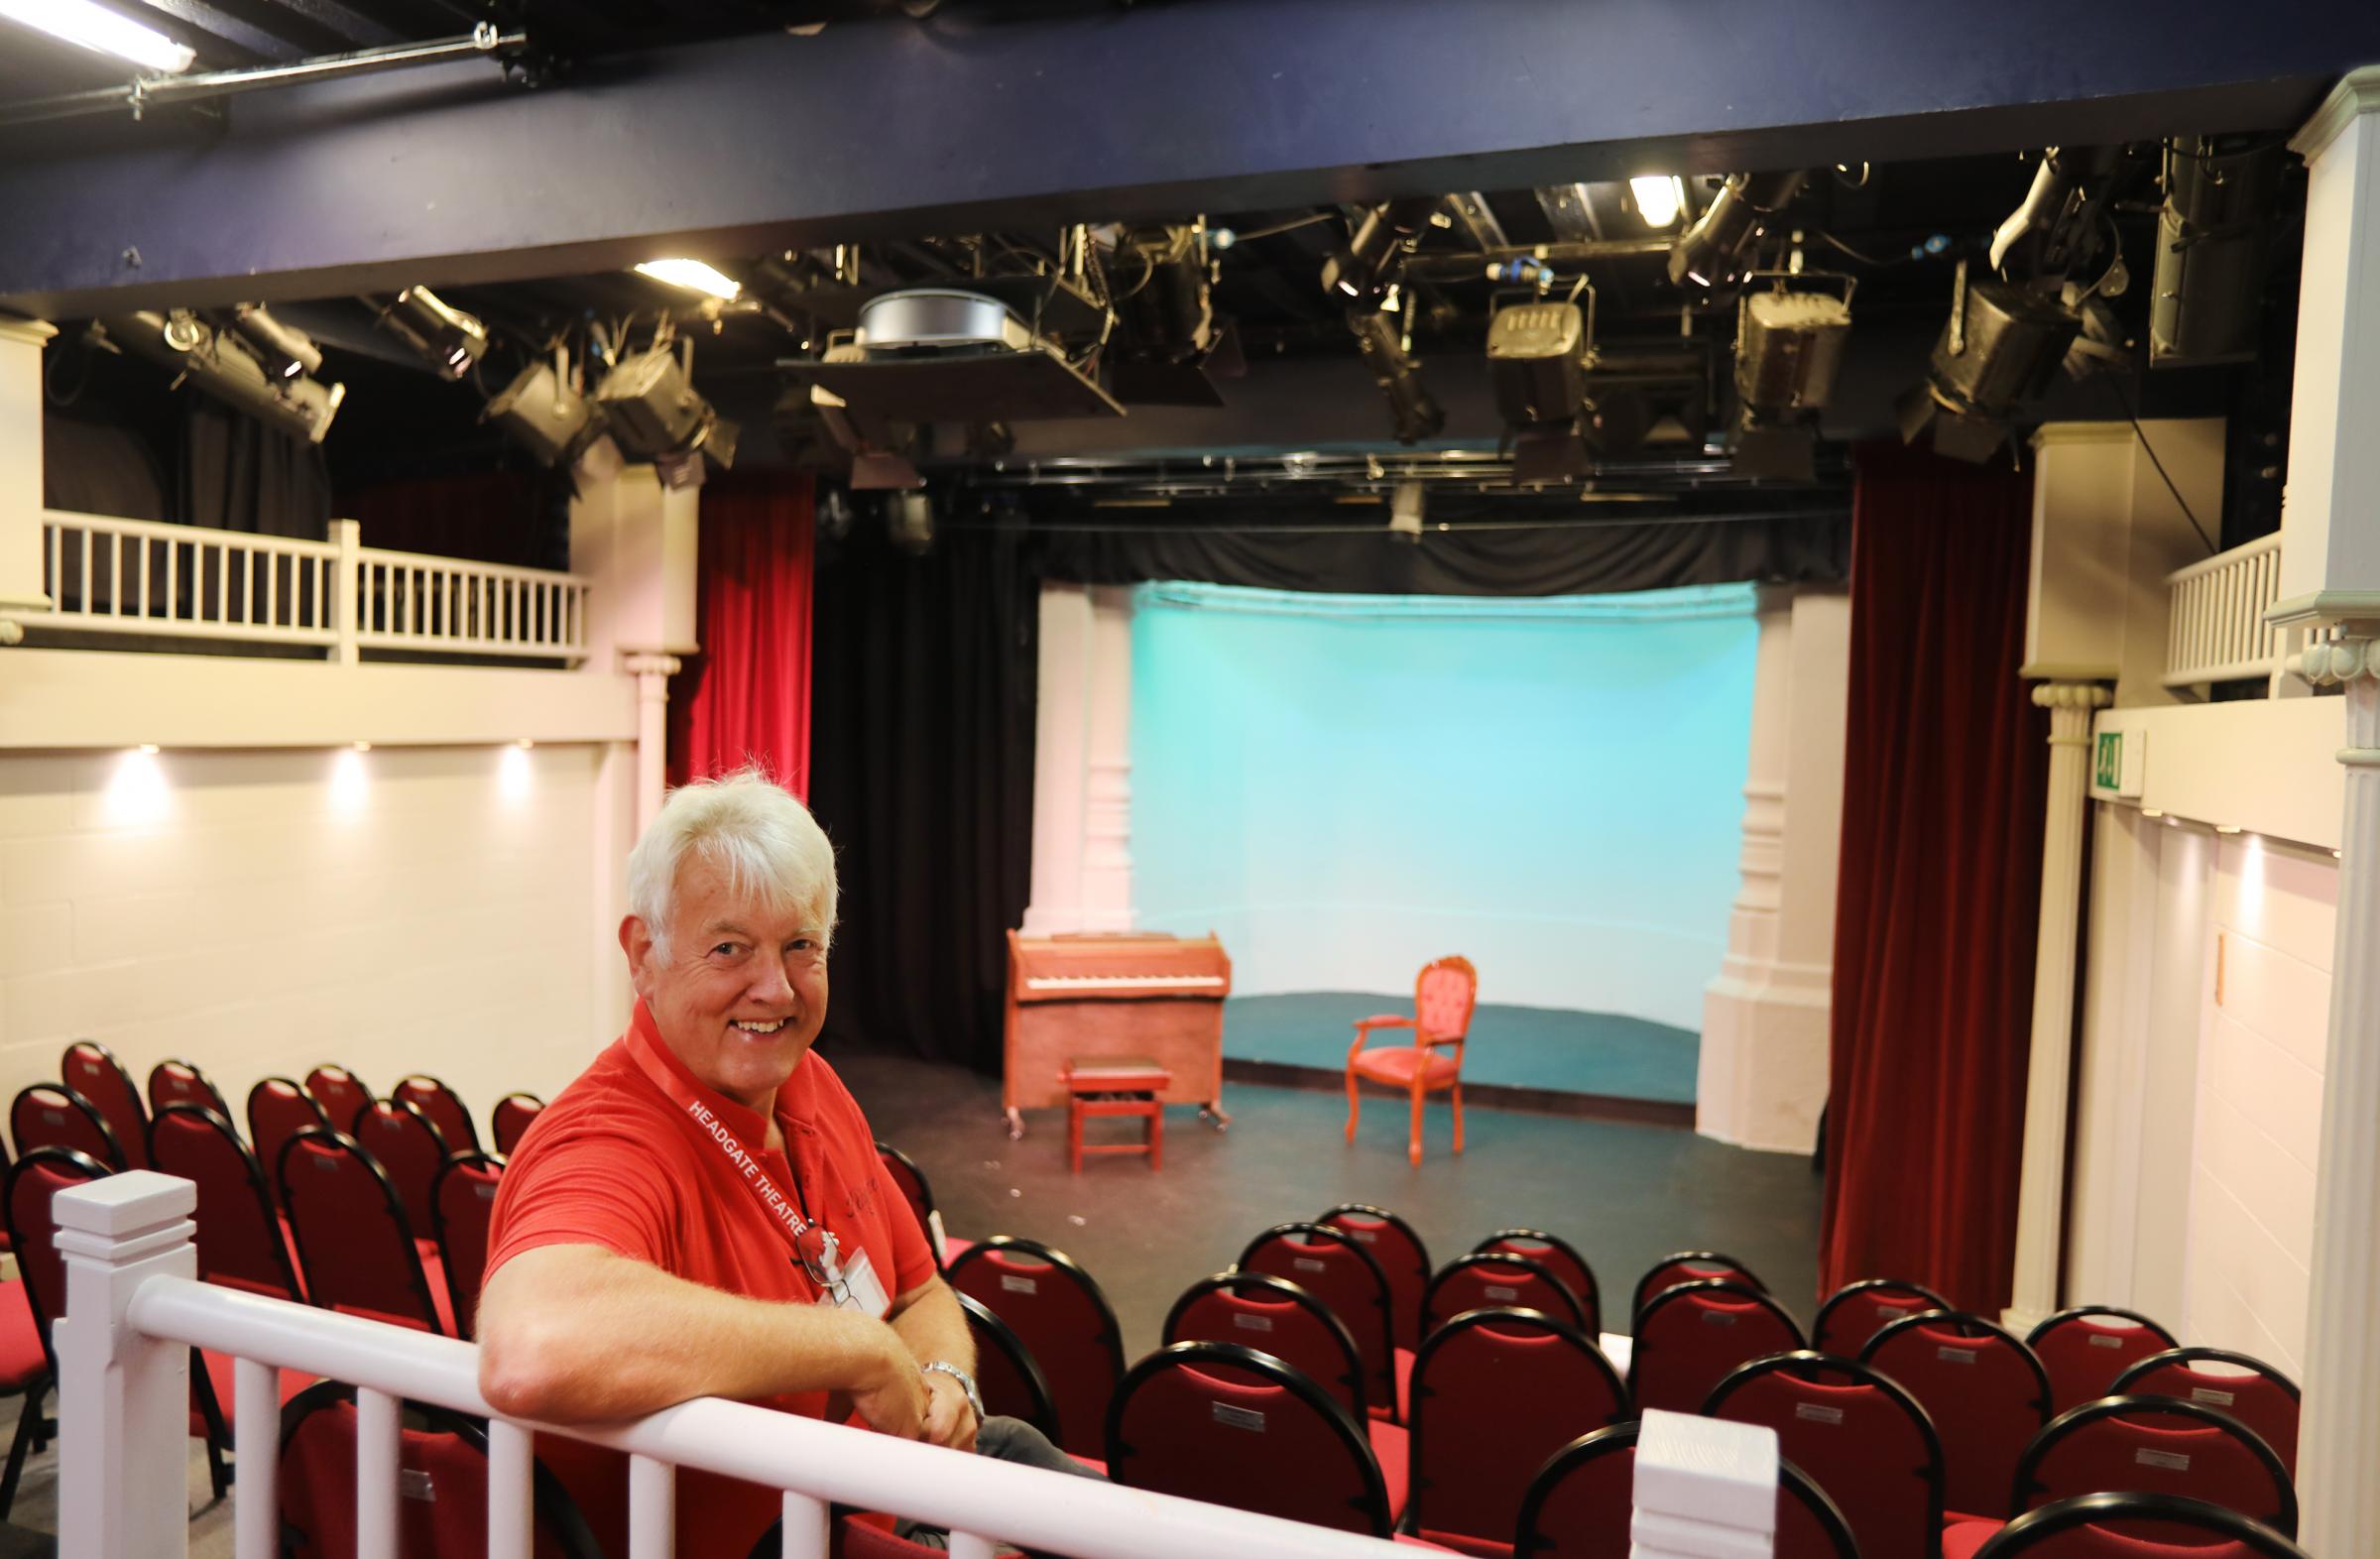 Reopening - Dave King inside the Headgate Theatre